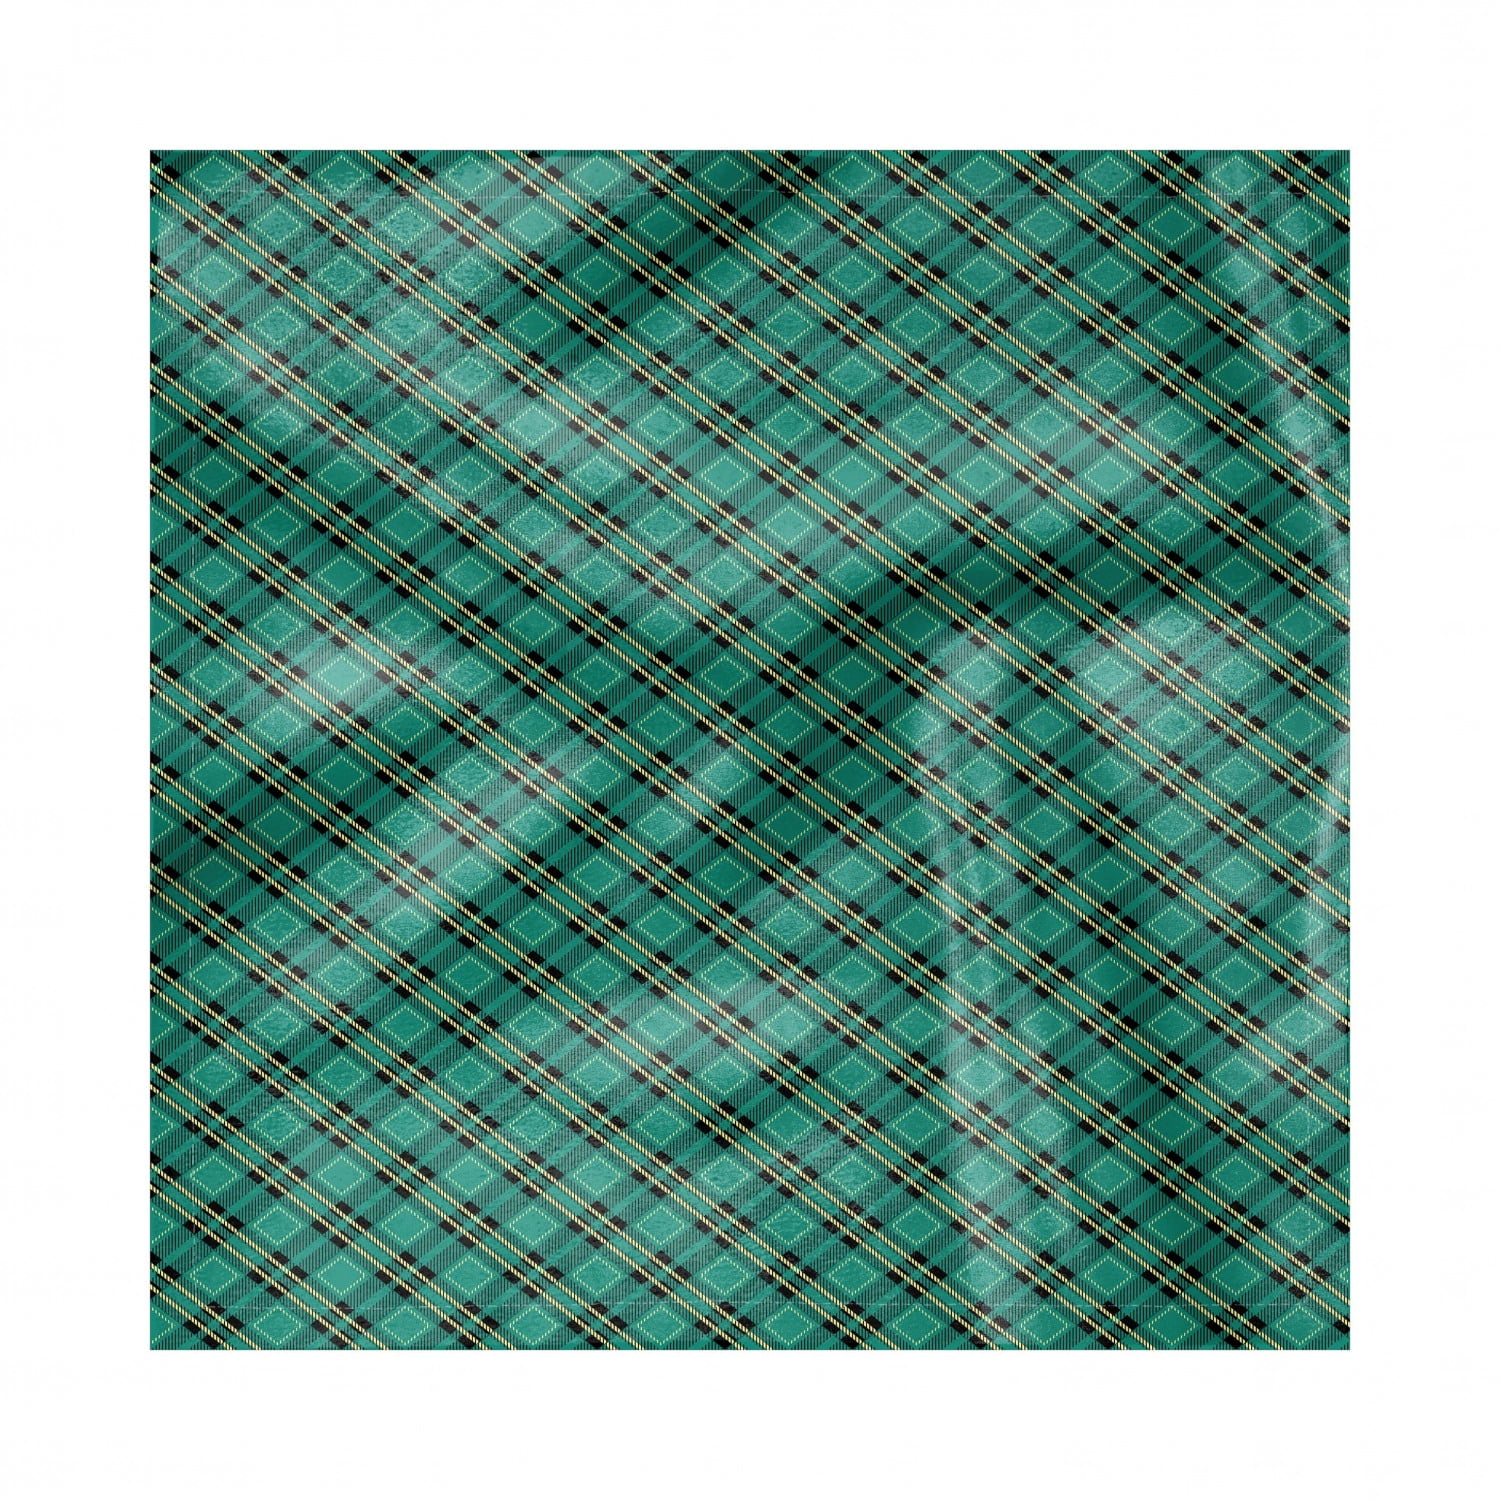 Ambesonne Celtic Green Place Mats Set of 4 Classical Tartan Diagonal Lines Arrangement Plaid Print Washable Fabric Placemats for Dining Room Kitchen Table Decor Teal Pastel Yellow Charcoal Grey